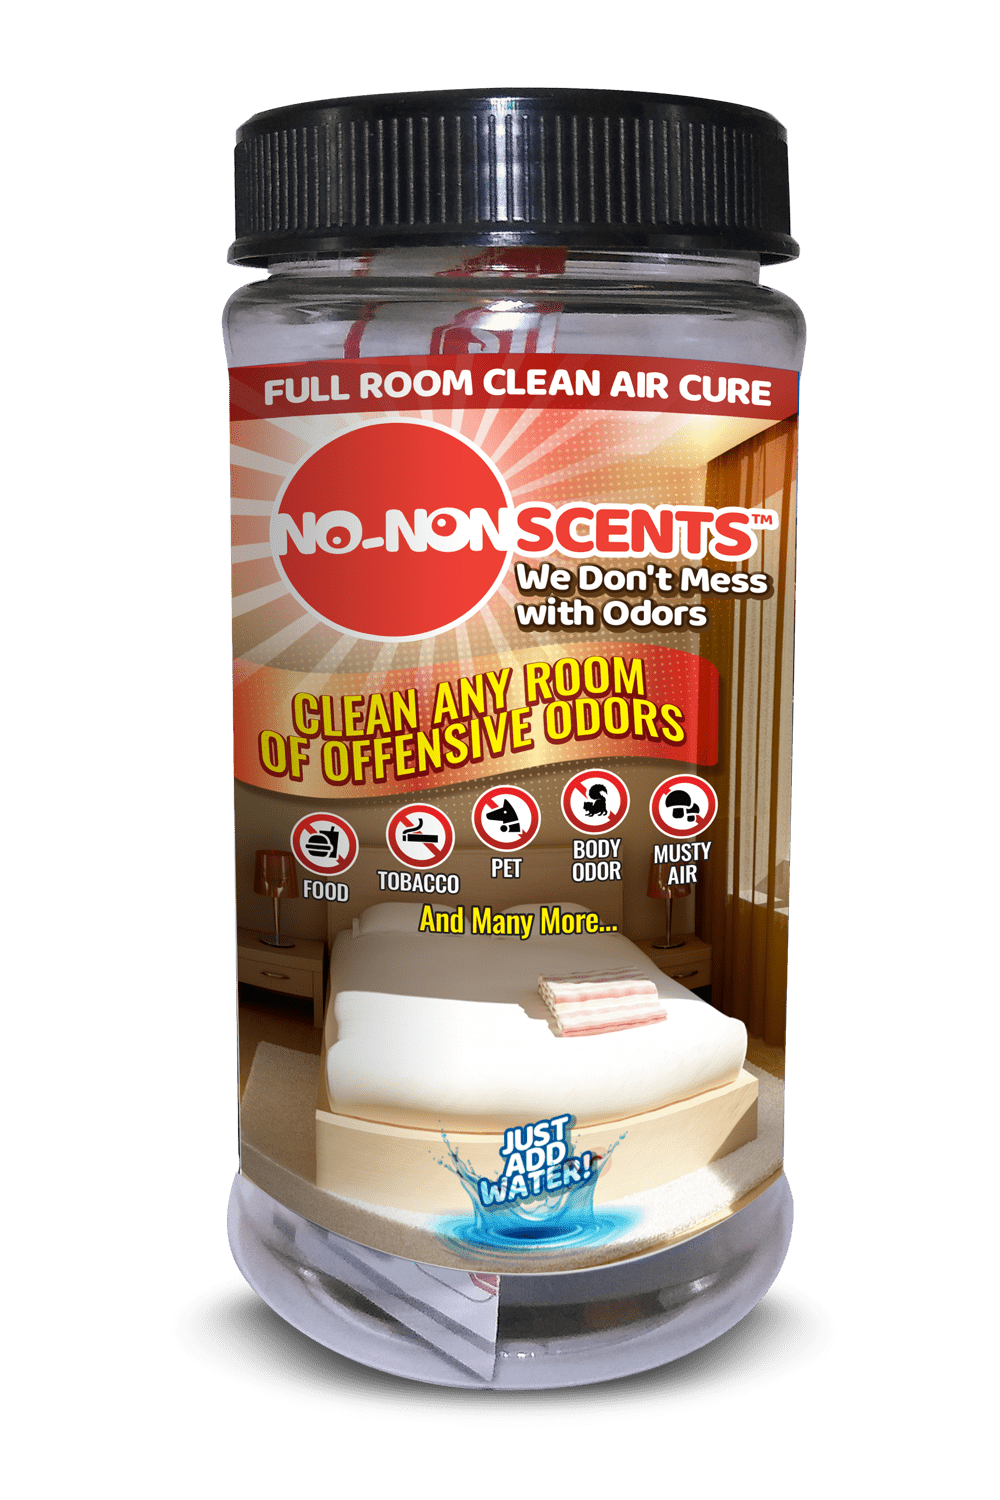 No-NonScents Odor Control & Maintain Deluxe Starter Kit